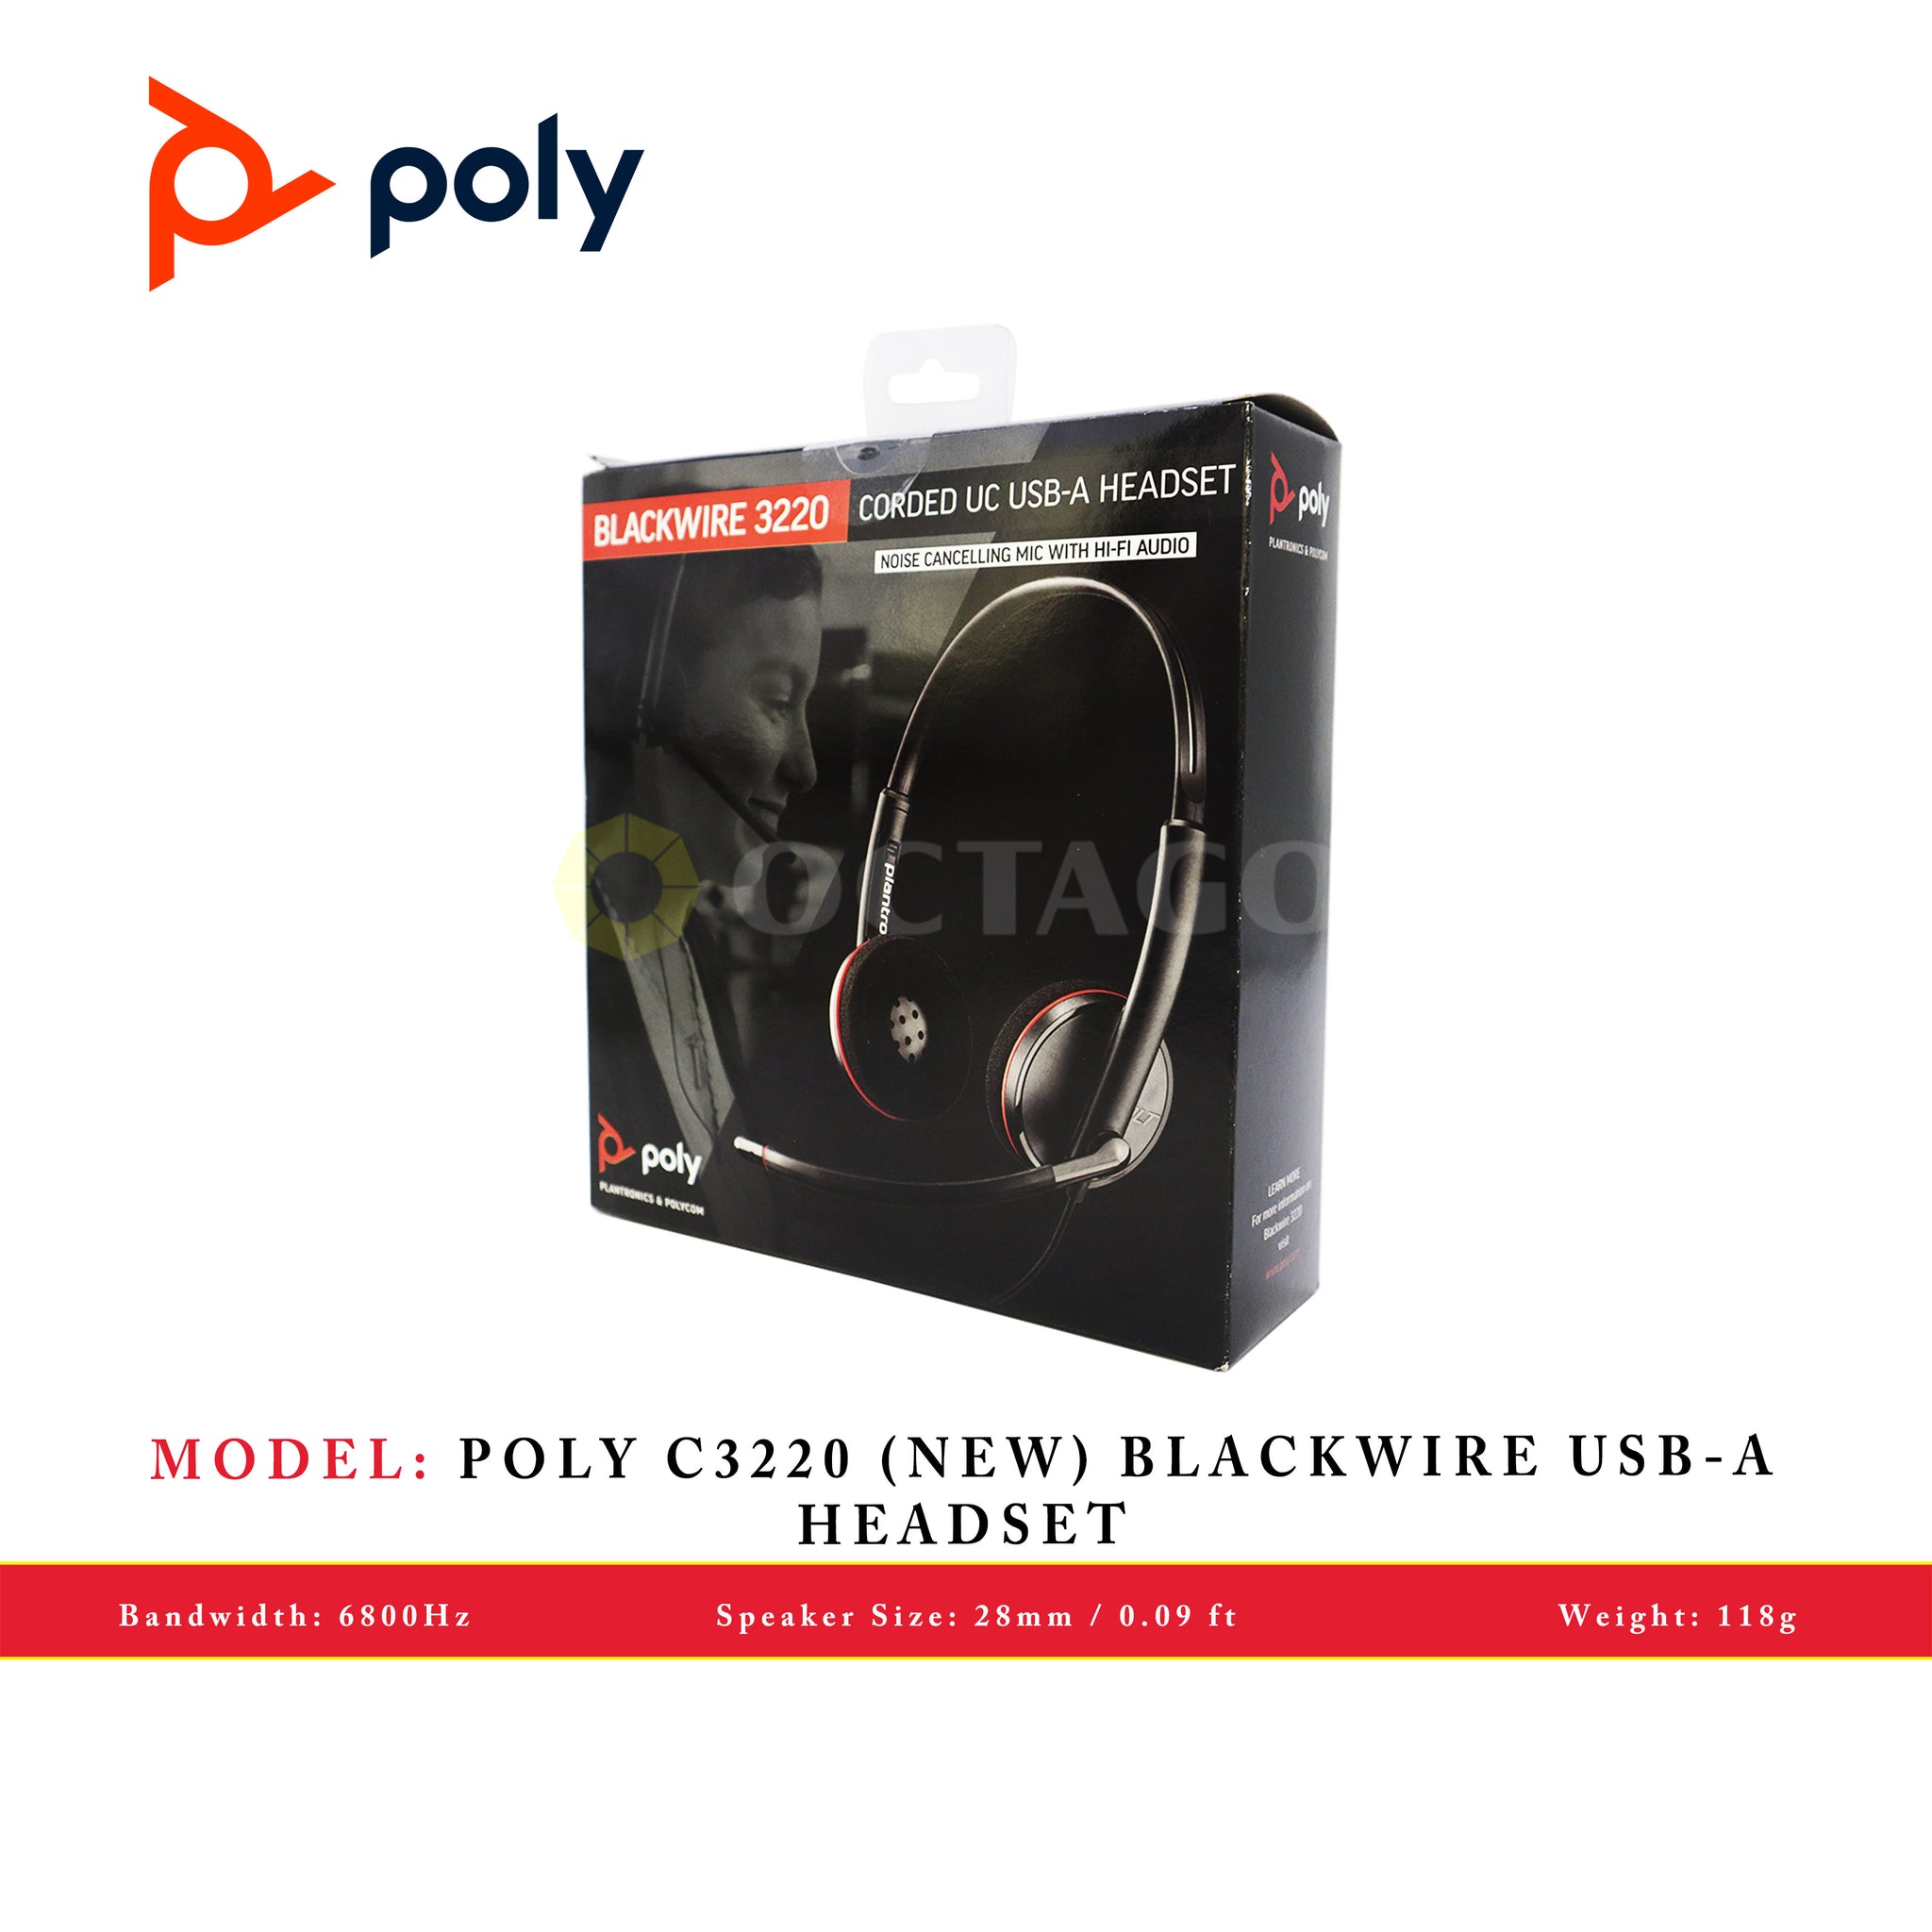 POLY C3220 (NEW) BLACKWIRE USB-A HEADSET